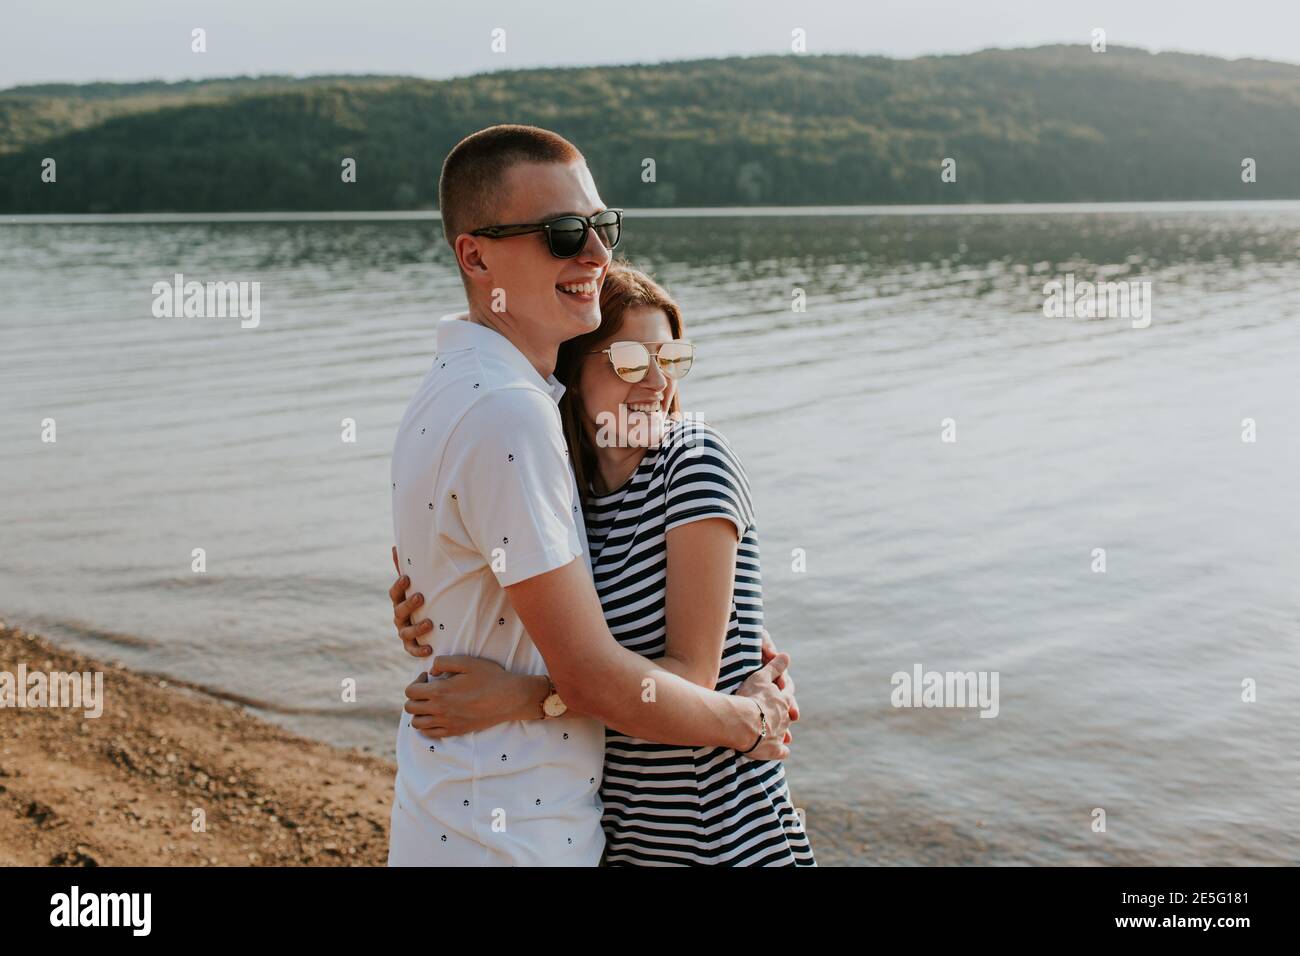 Cheerful couple in love hugging at the lake at sunset. Portrait of smiling boyfriend and girlfriend embracing on the beach on warm summer evening. Stock Photo